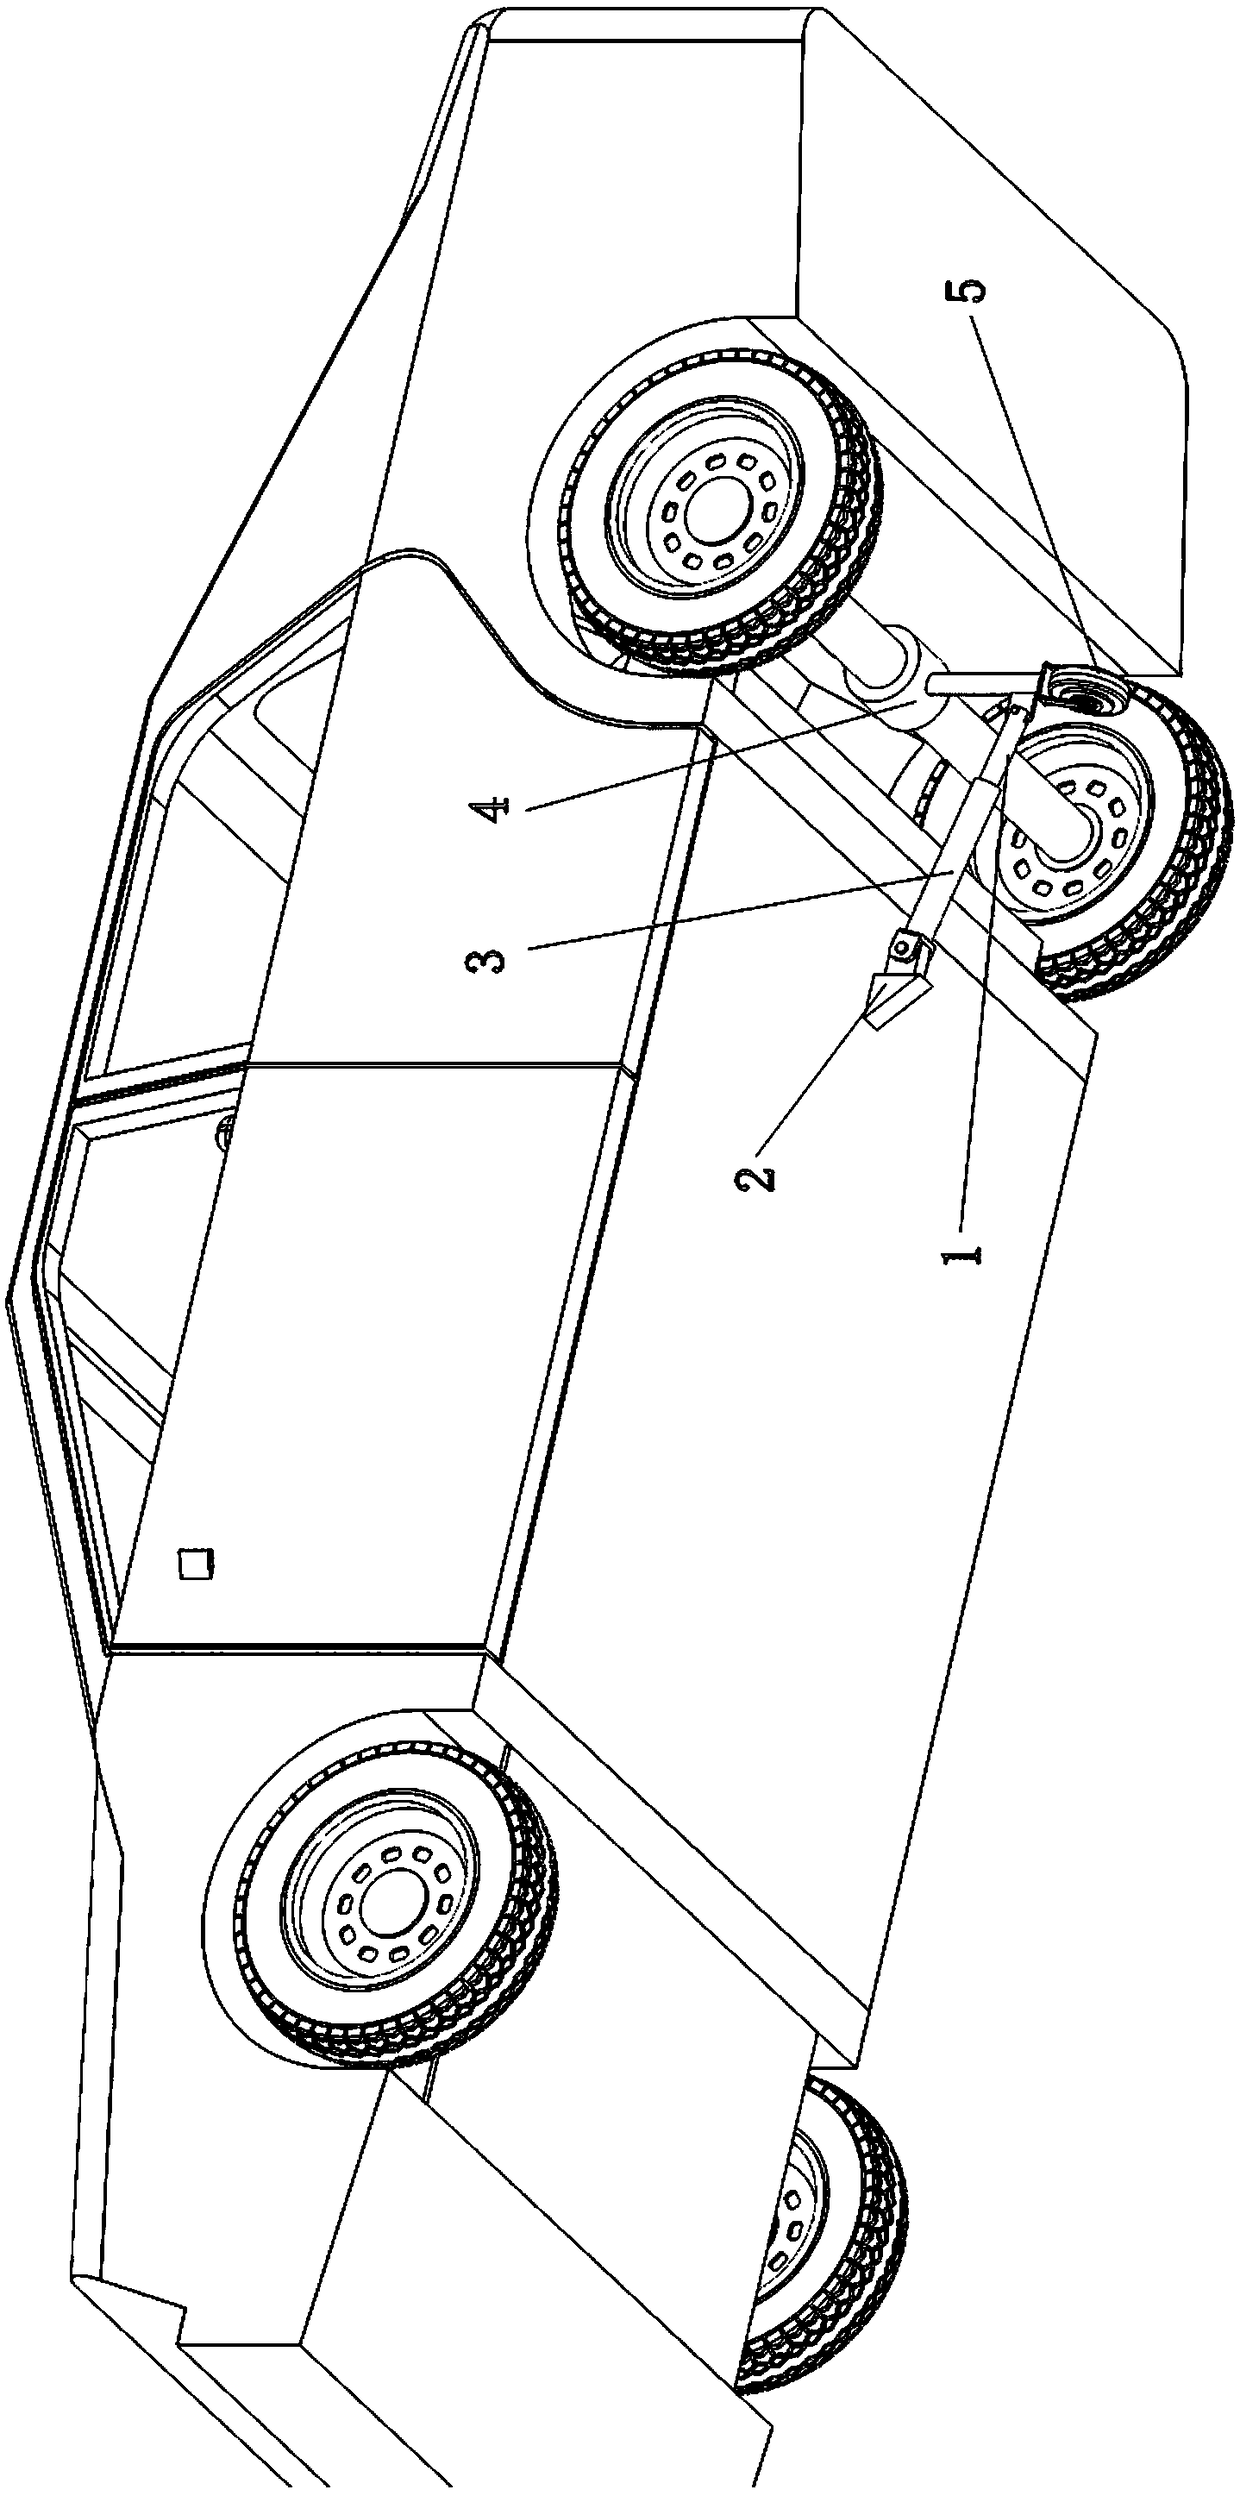 Parking auxiliary system for automatically-driven car